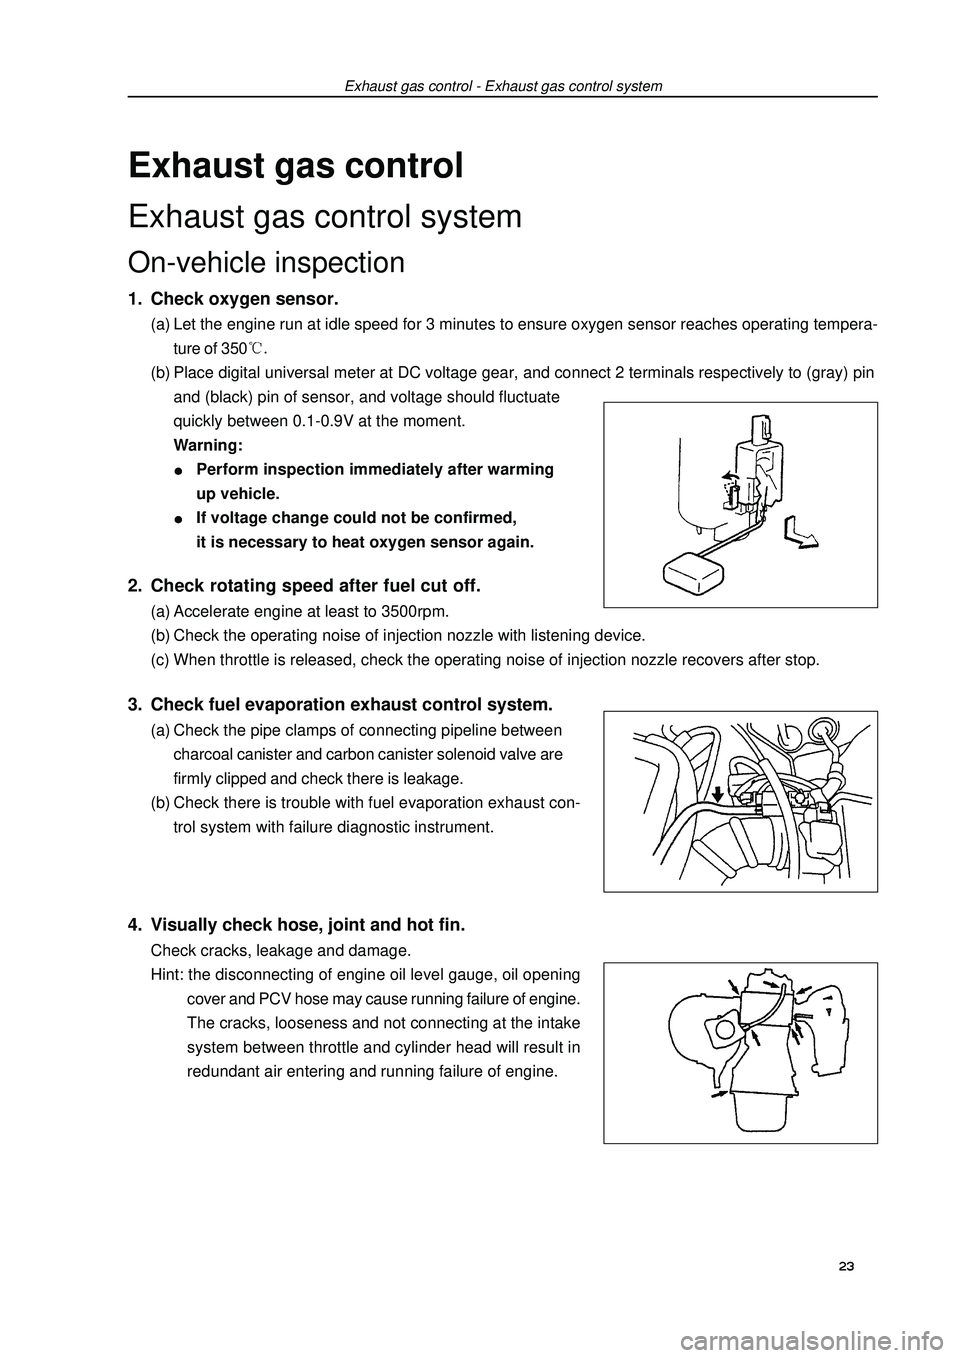 GEELY FC 2008 Owners Guide Exhaust gas controlExhaust gas control systemOn-vehicle inspection1. Check oxygen sensor.(a) Let the engine run at idle speed for 3 minutes to ensure oxygen sensor reaches operating tempera-
ture of 3